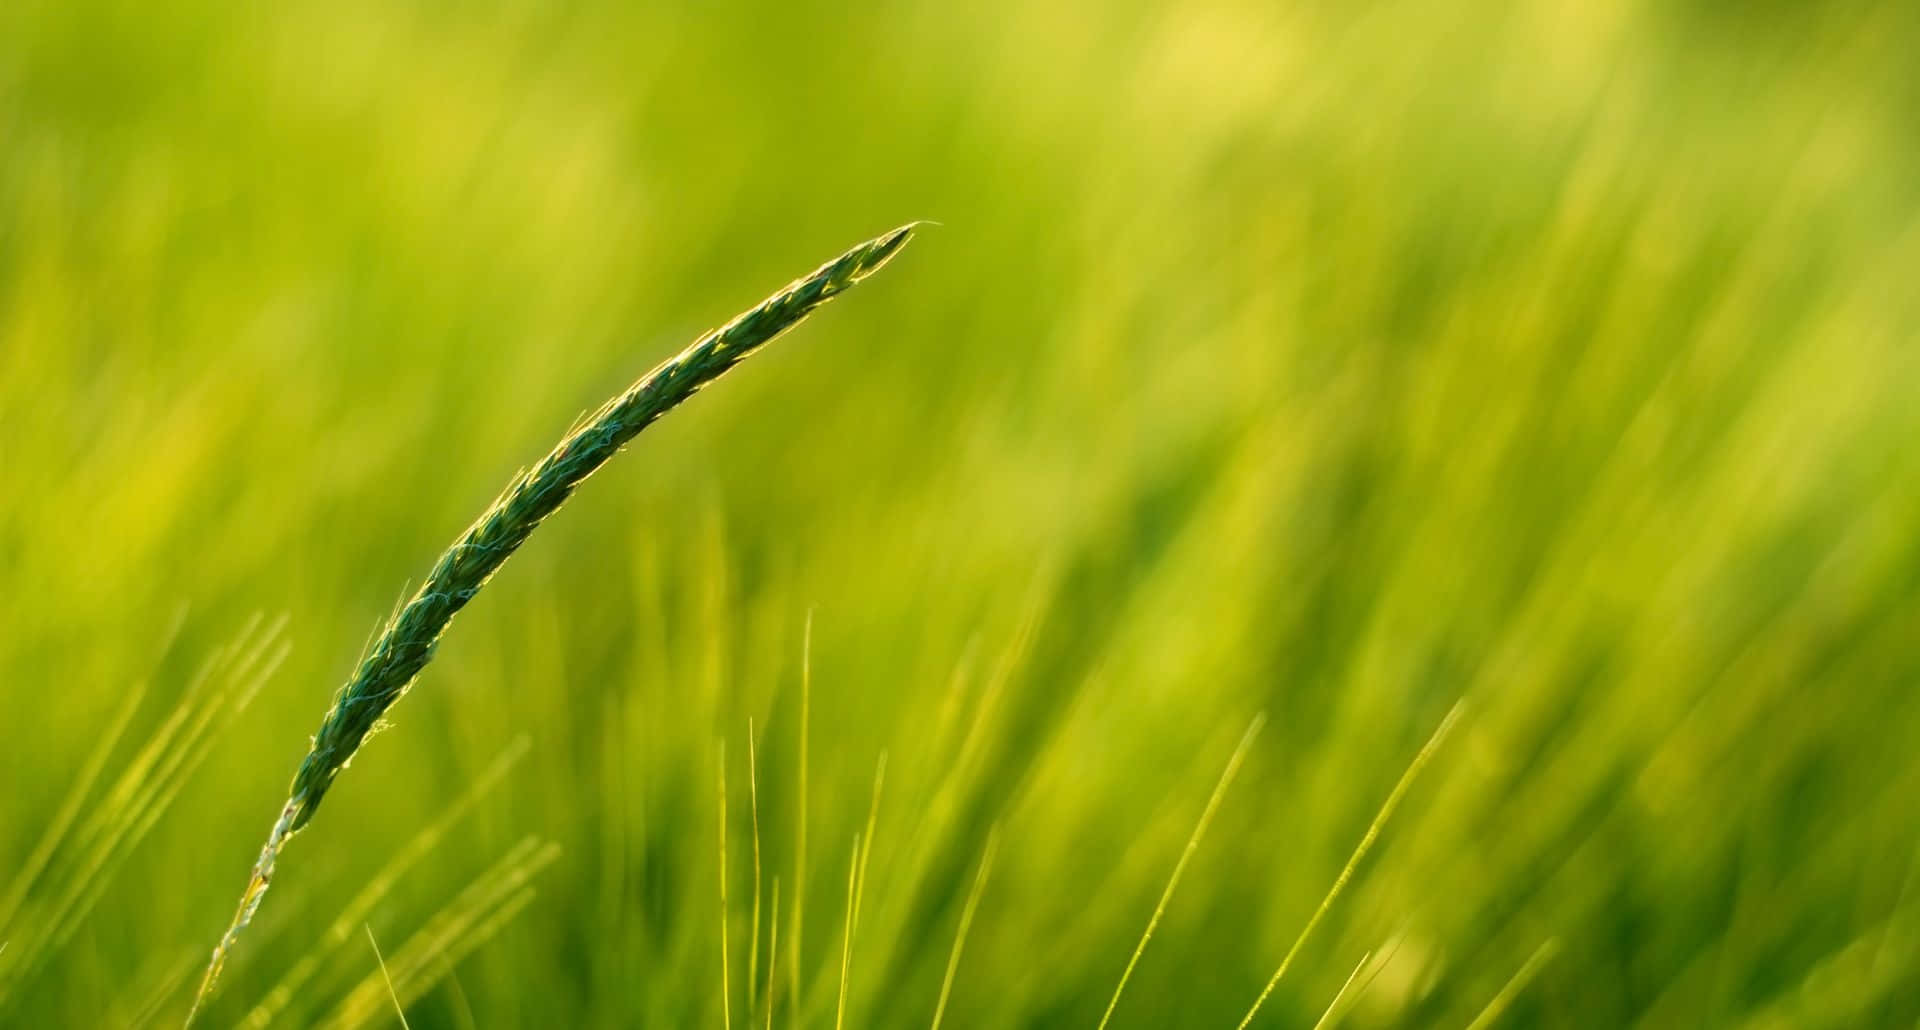 A Close Up Of A Green Grass In The Field